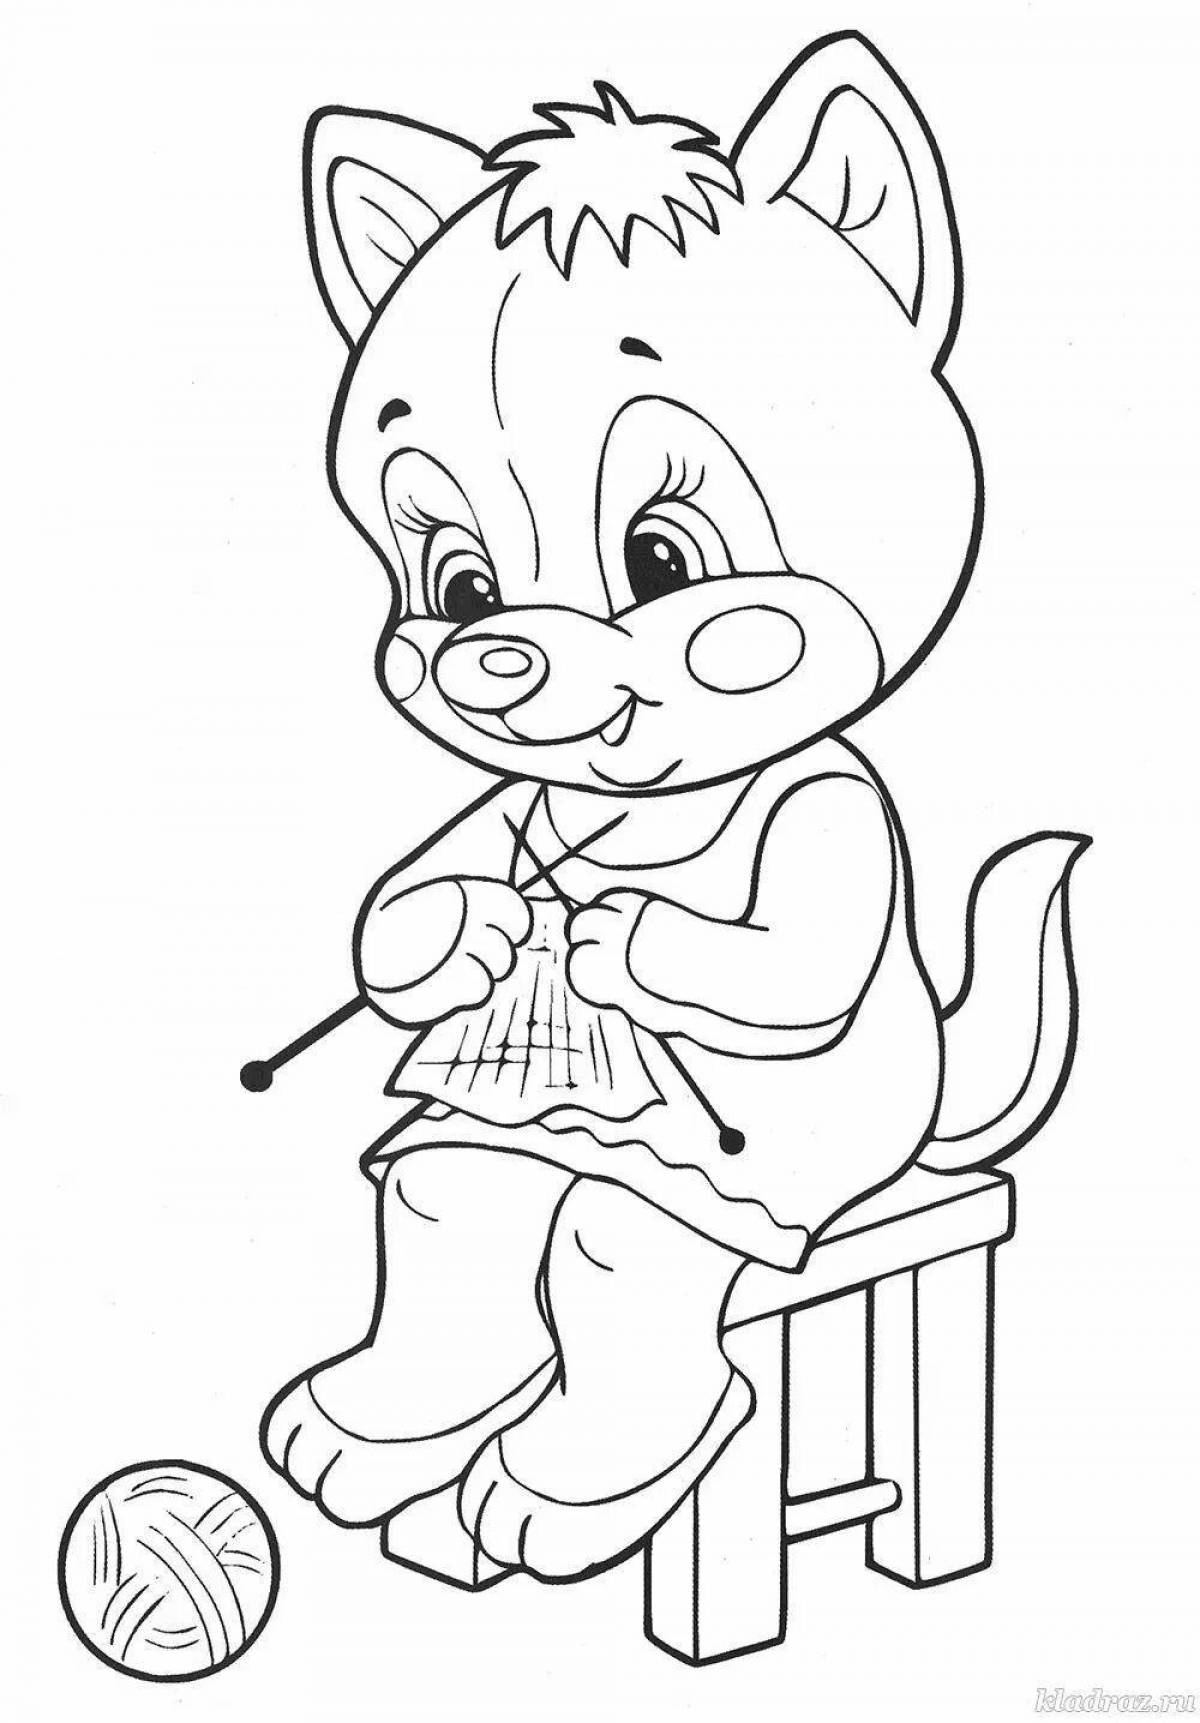 Coloring page amazing wolf cub